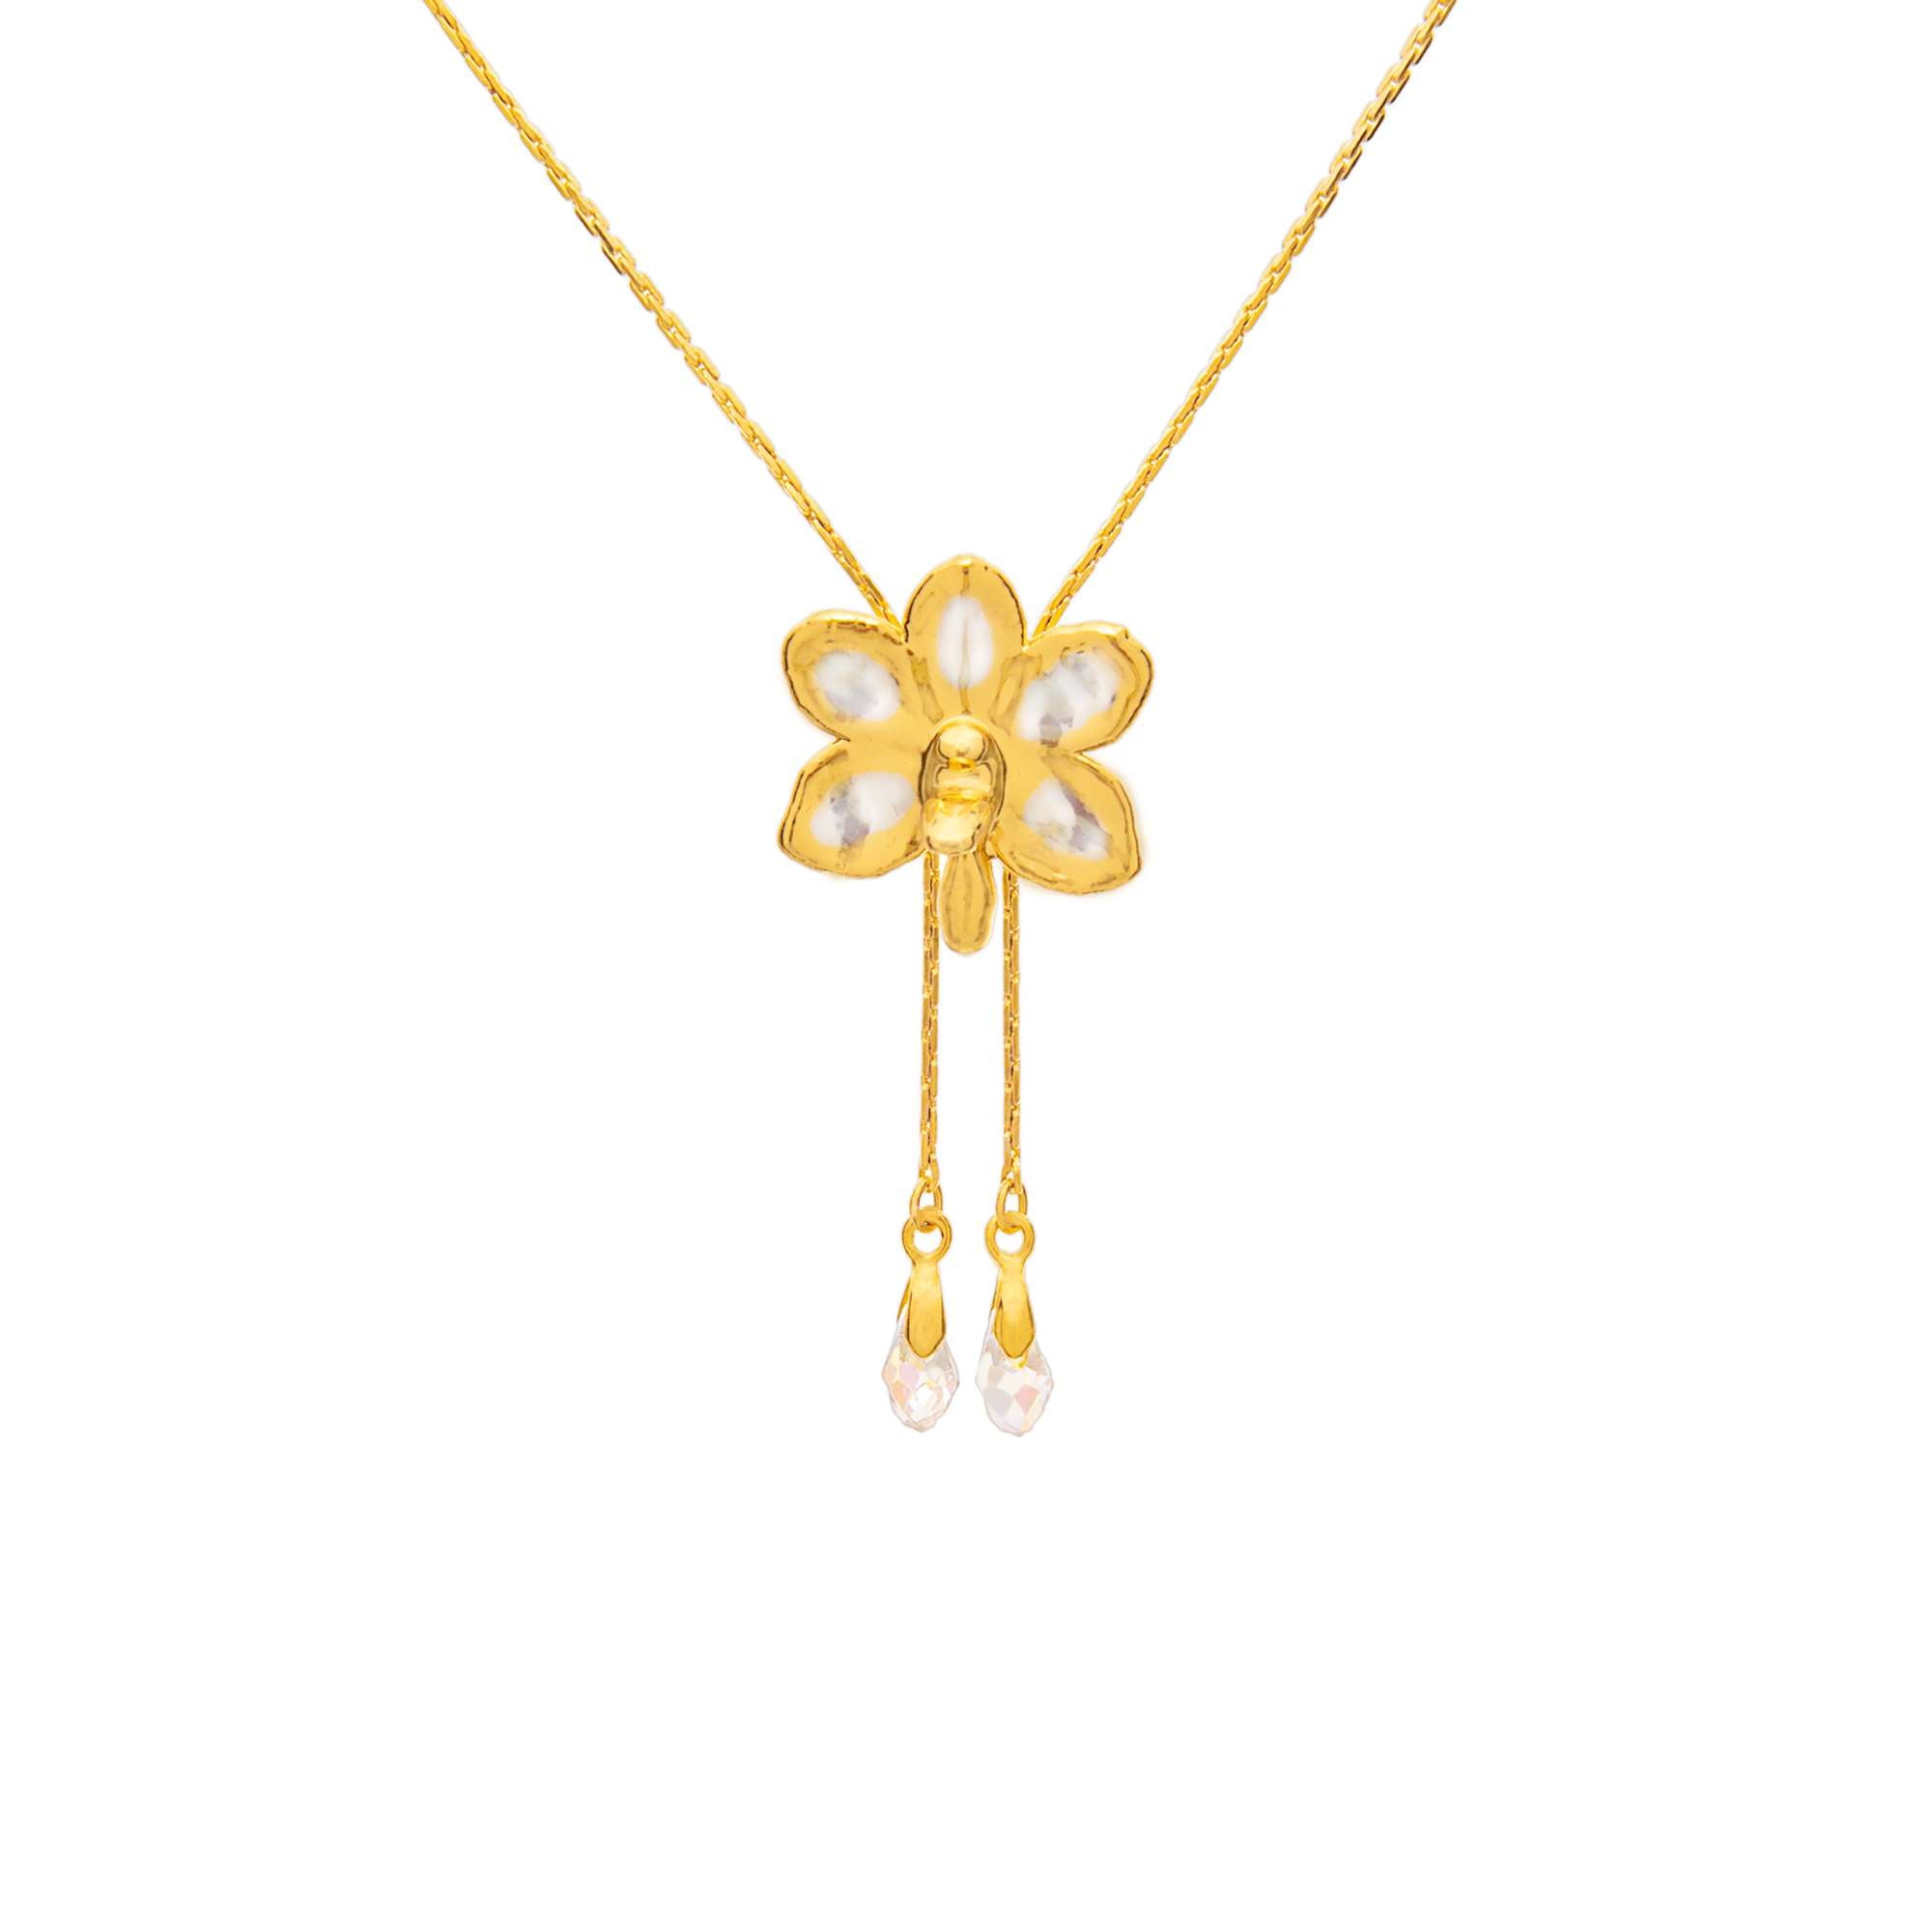 Ascocenda Sagarik Gold Orchid Slider Necklace with Crystal Tailends (PG)